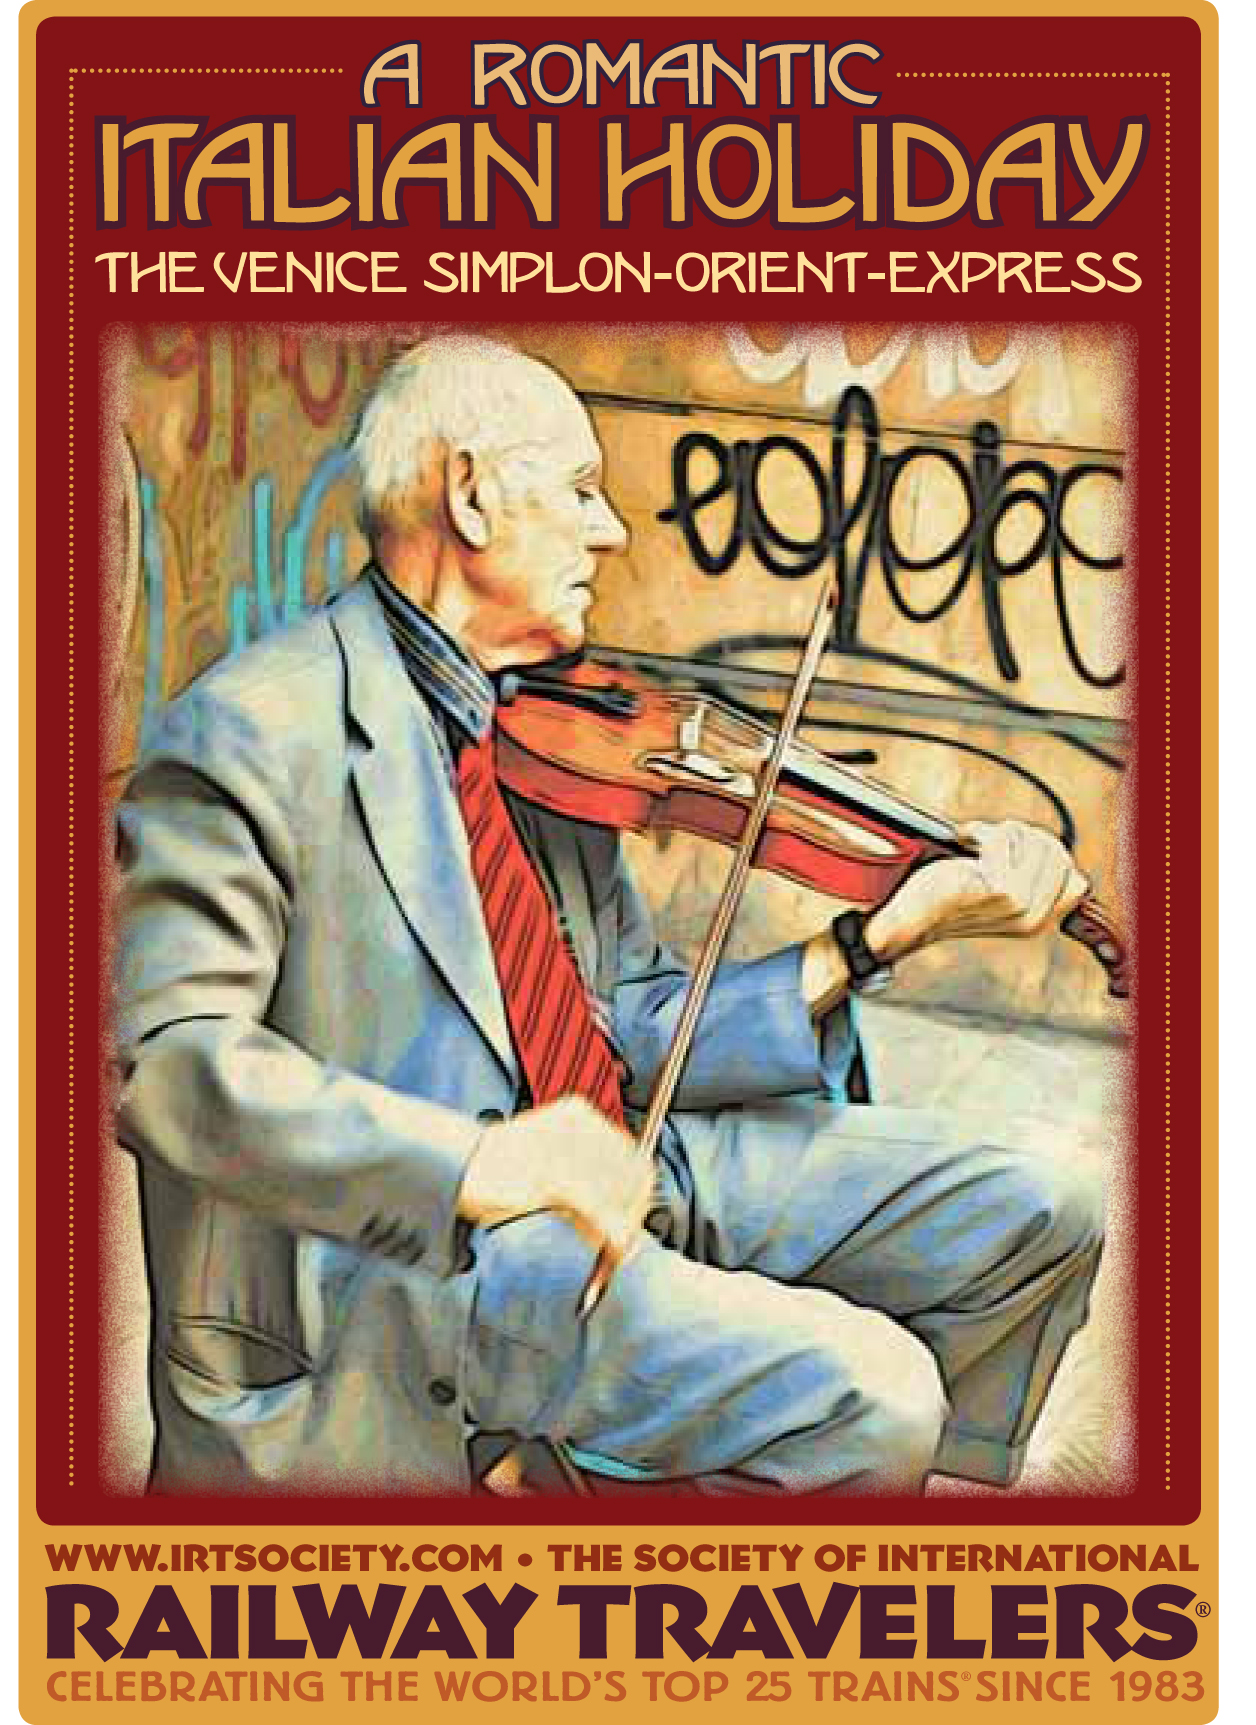 While wandering the streets of Florence, Italy, Owen and Eleanor Hardy heard this captivating violinist long before seeing him. This poster celebrates the beauty and humanity of travel on the Venice Simplon-Orient-Express. It has long held its spot on The Society of IRT's World's Top 25 Trains® list. Poster design by Stephen Sebree; IRT Photo by Owen Hardy.